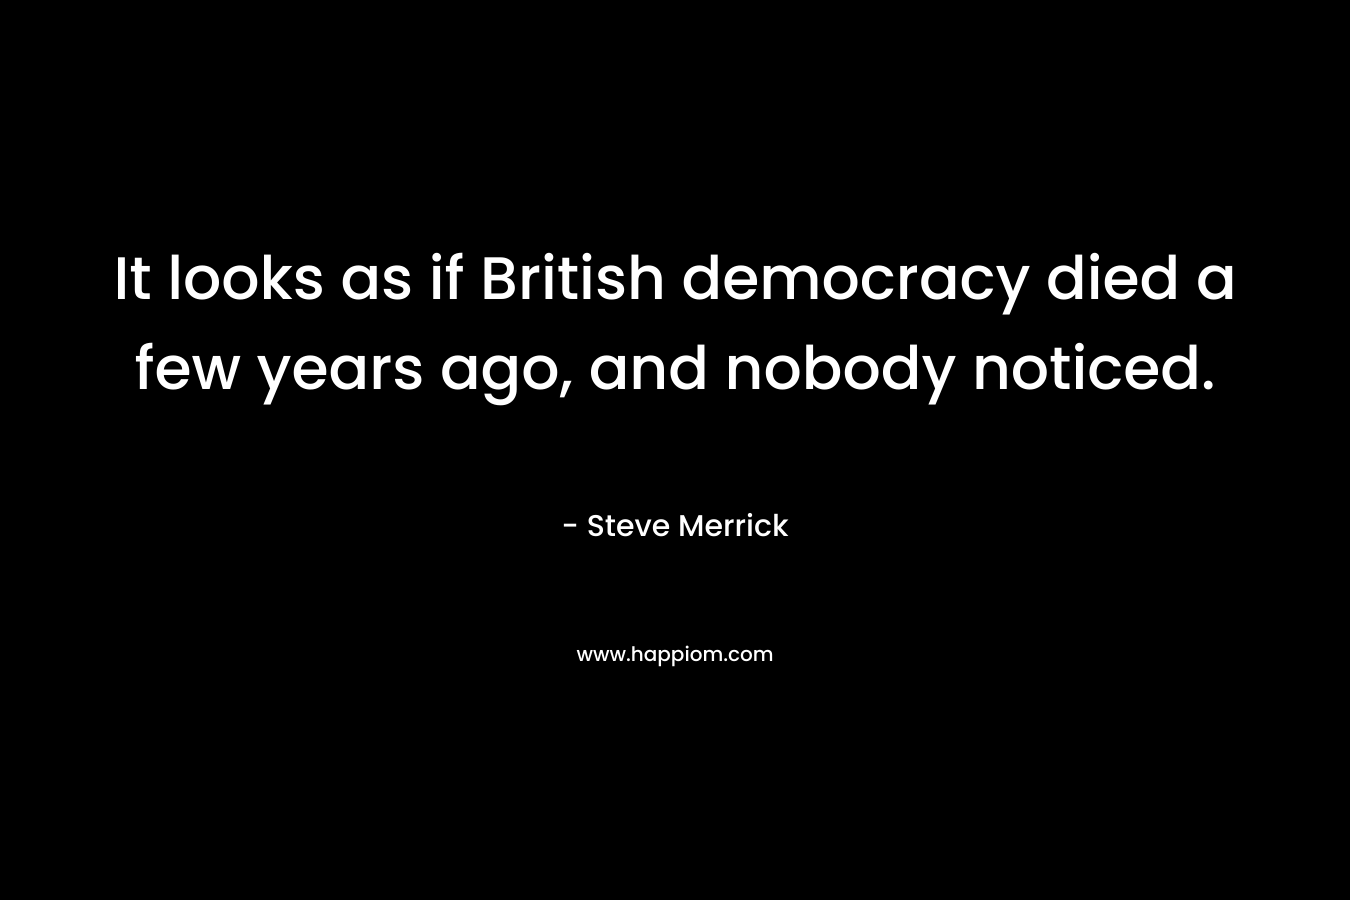 It looks as if British democracy died a few years ago, and nobody noticed. – Steve Merrick